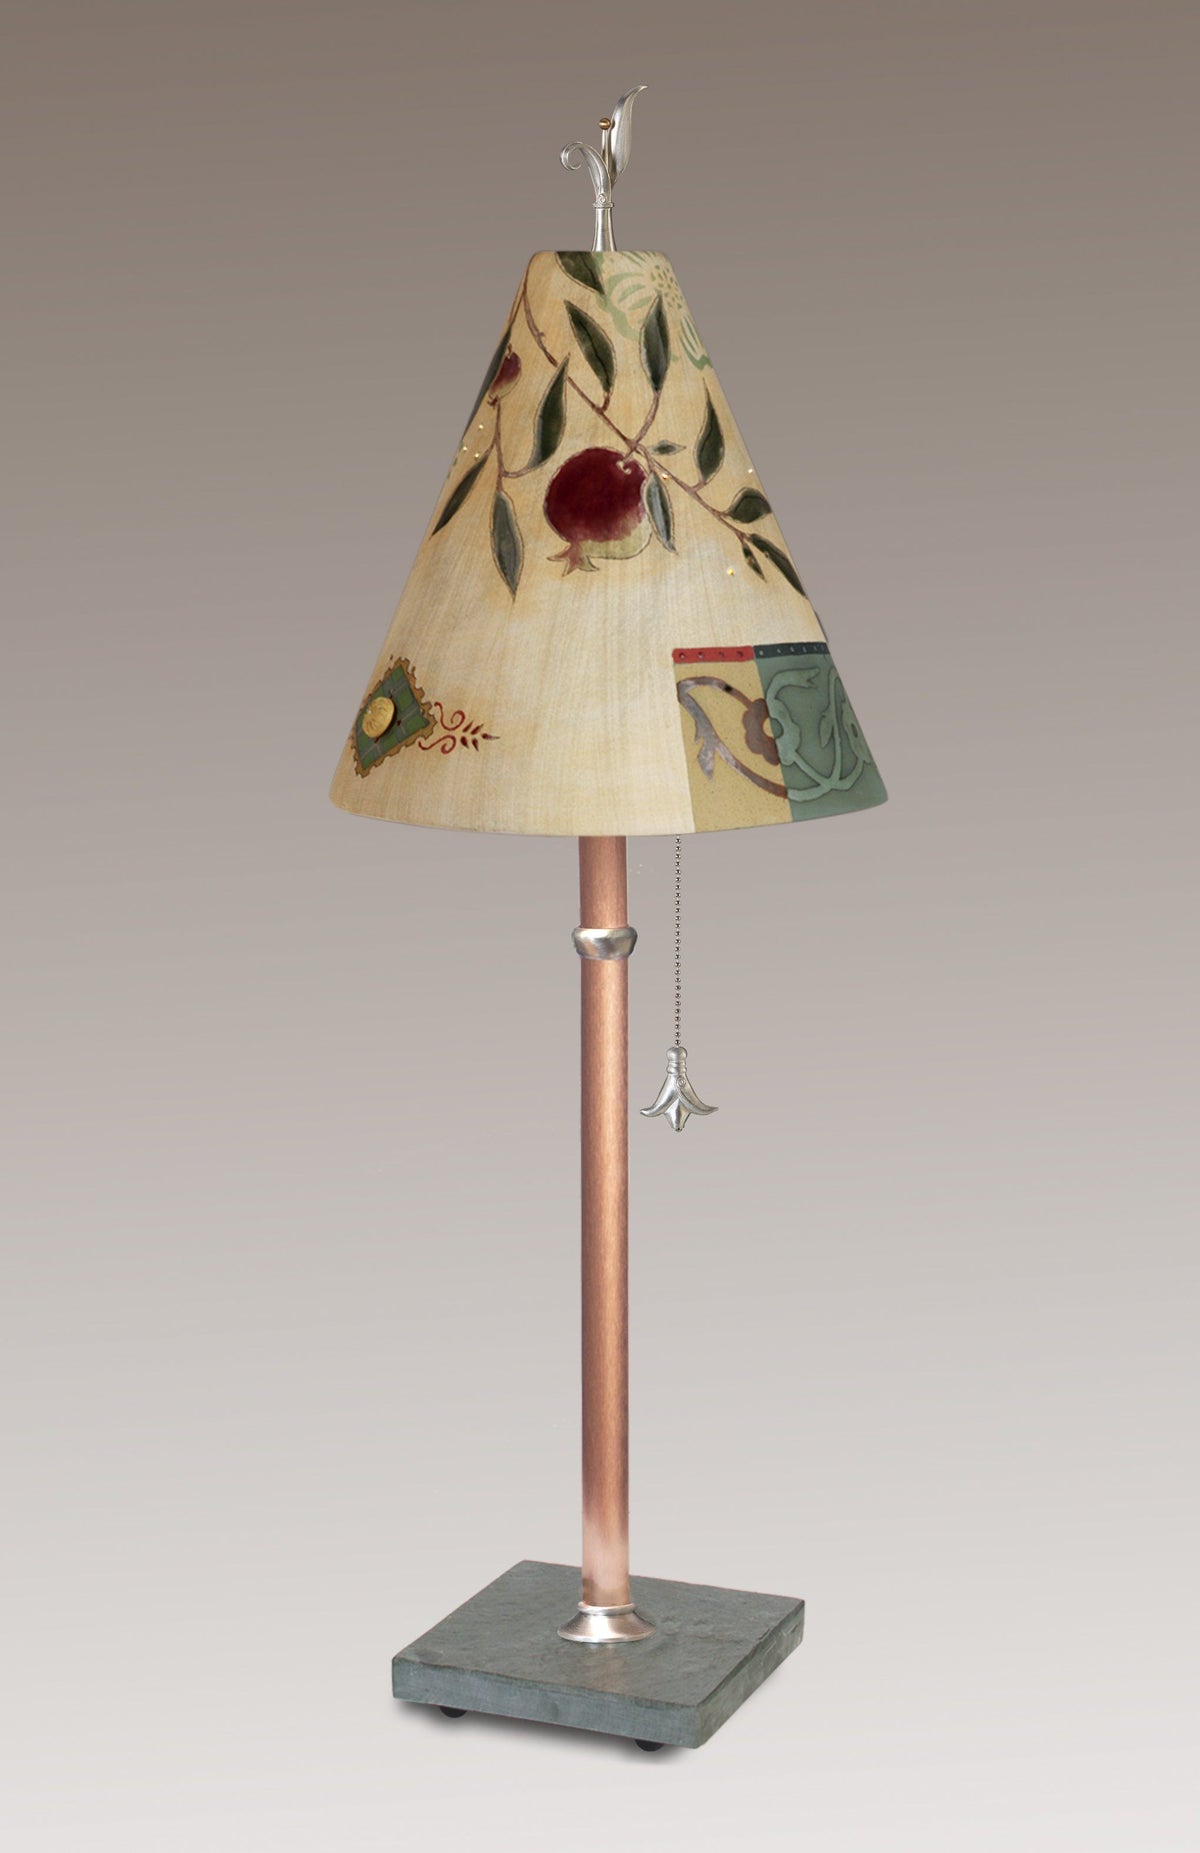 Janna Ugone &amp; Co Table Lamps Copper Table Lamp with Small Conical Ceramic Shade in Pomegranate Ribbon